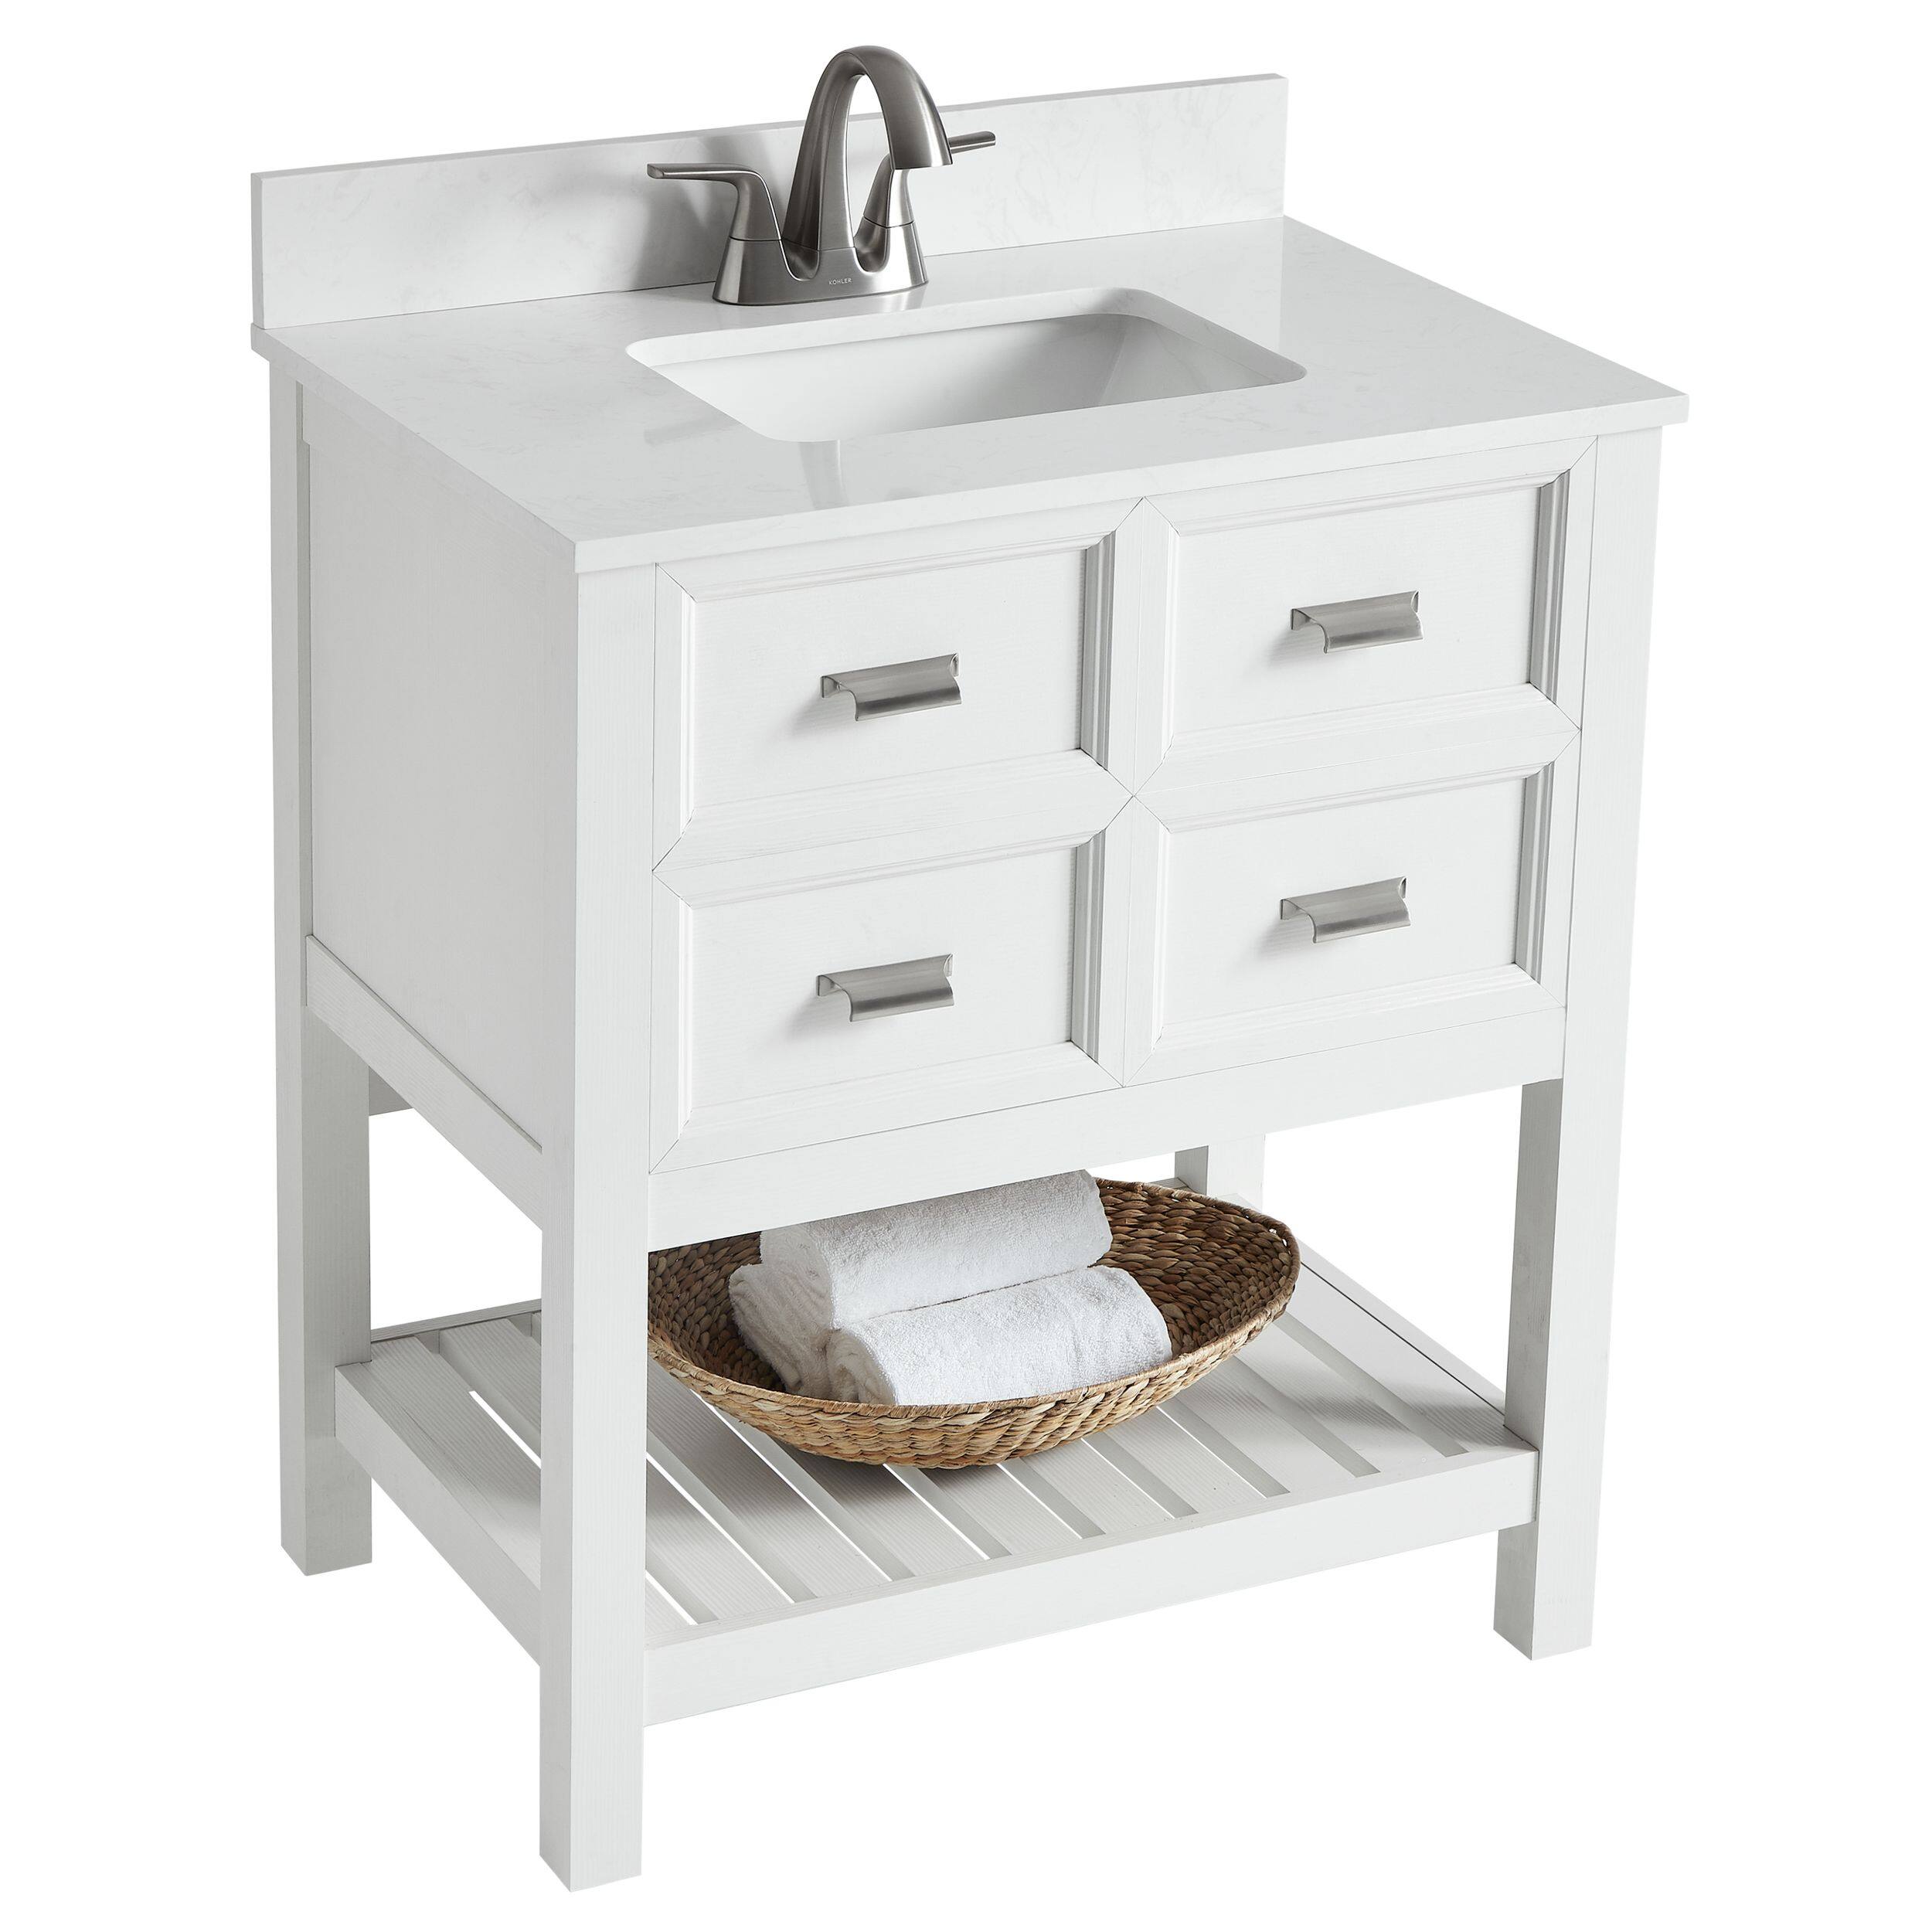 CANVAS Gibsons 2-Drawer Bathroom Vanity, White, 30-in